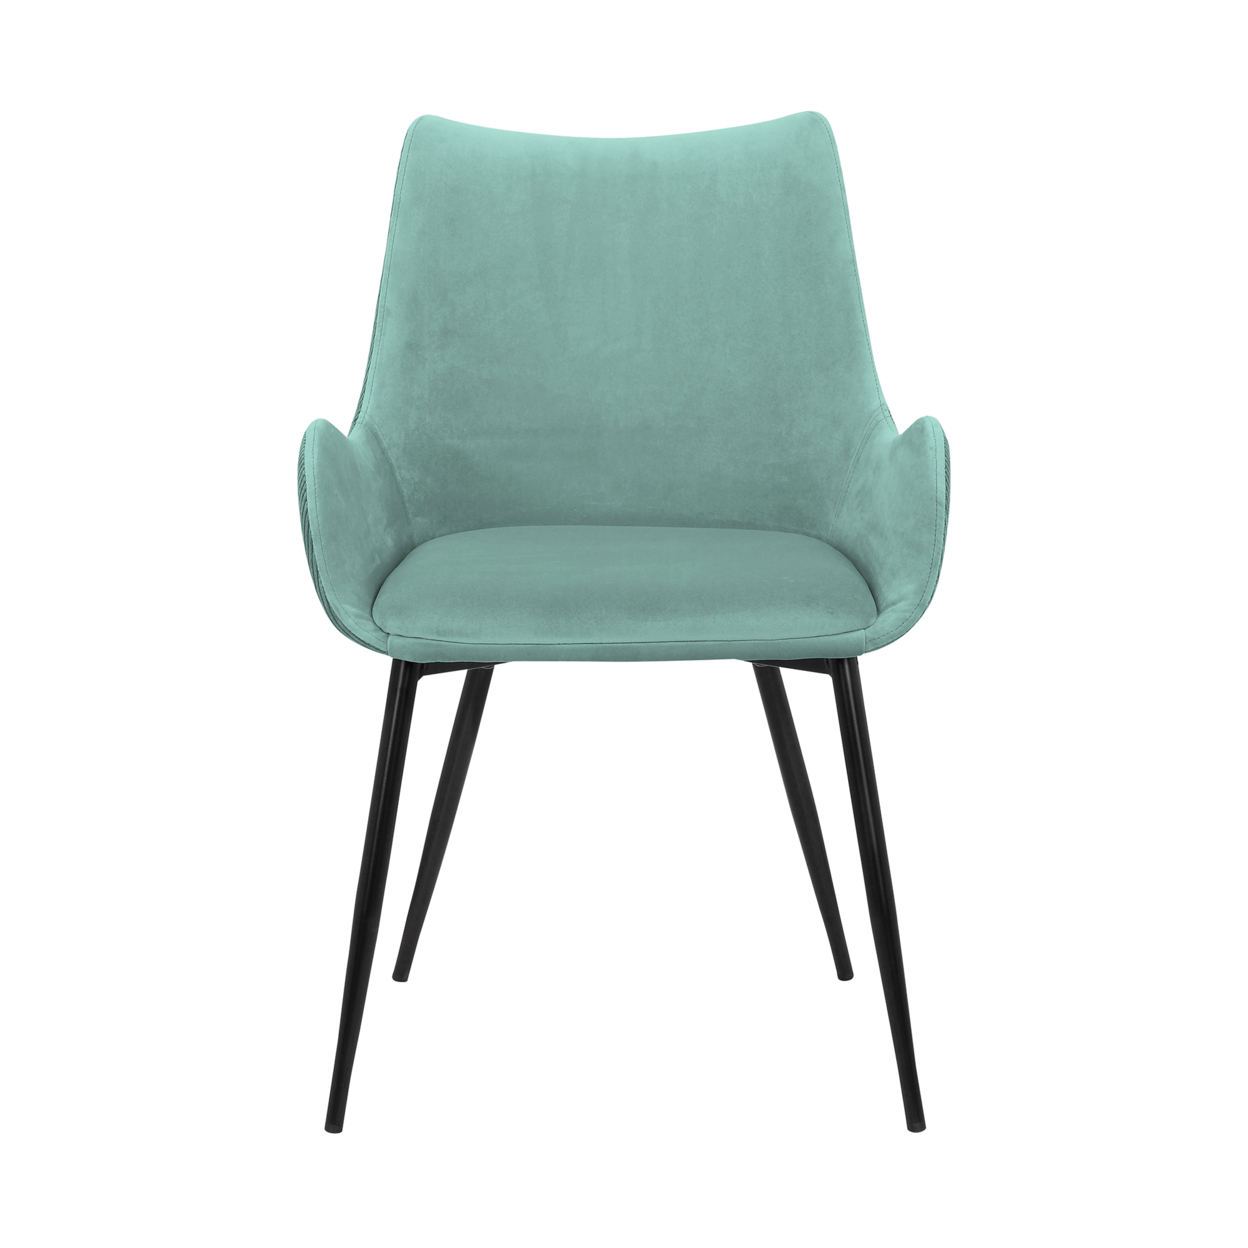 22 Inch Fabric Upholstered Dining Side Chair, Sloped Arms, Metal Legs, Teal Blue- Saltoro Sherpi